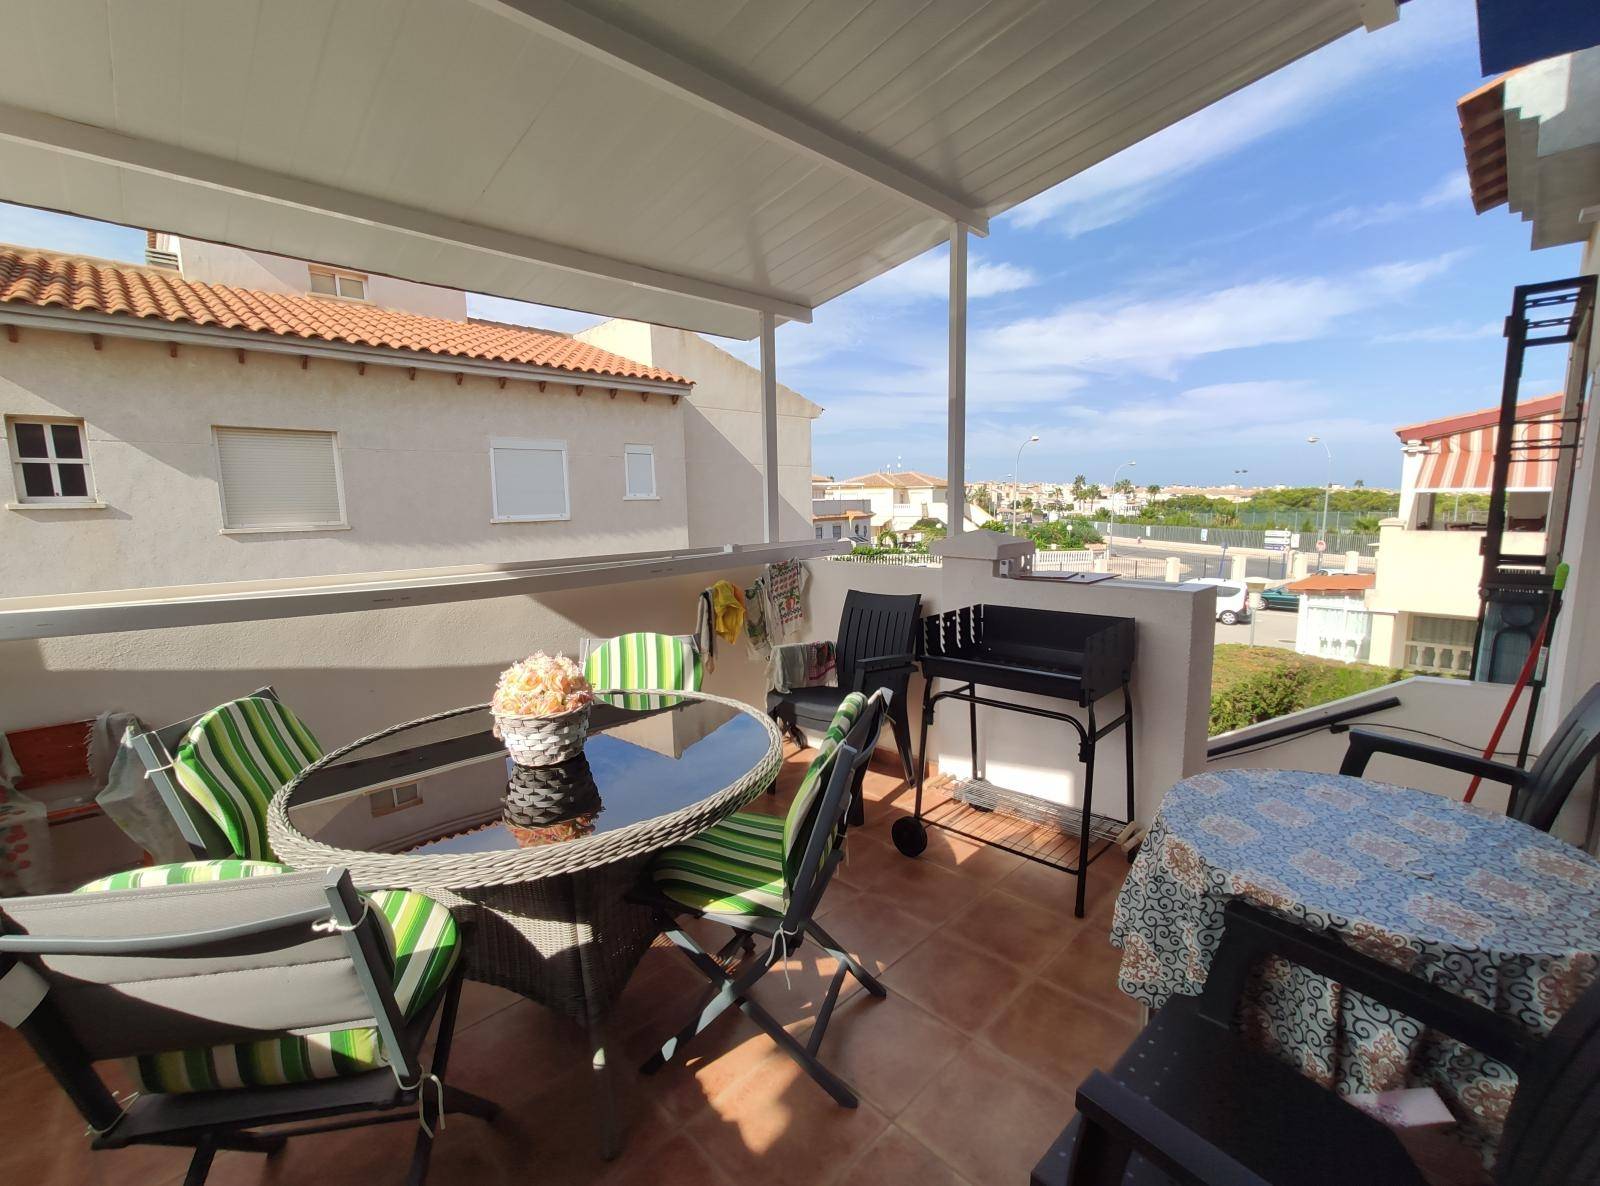 Top floor apartment with 2 bedrooms, 1 bathroom and communal pool.